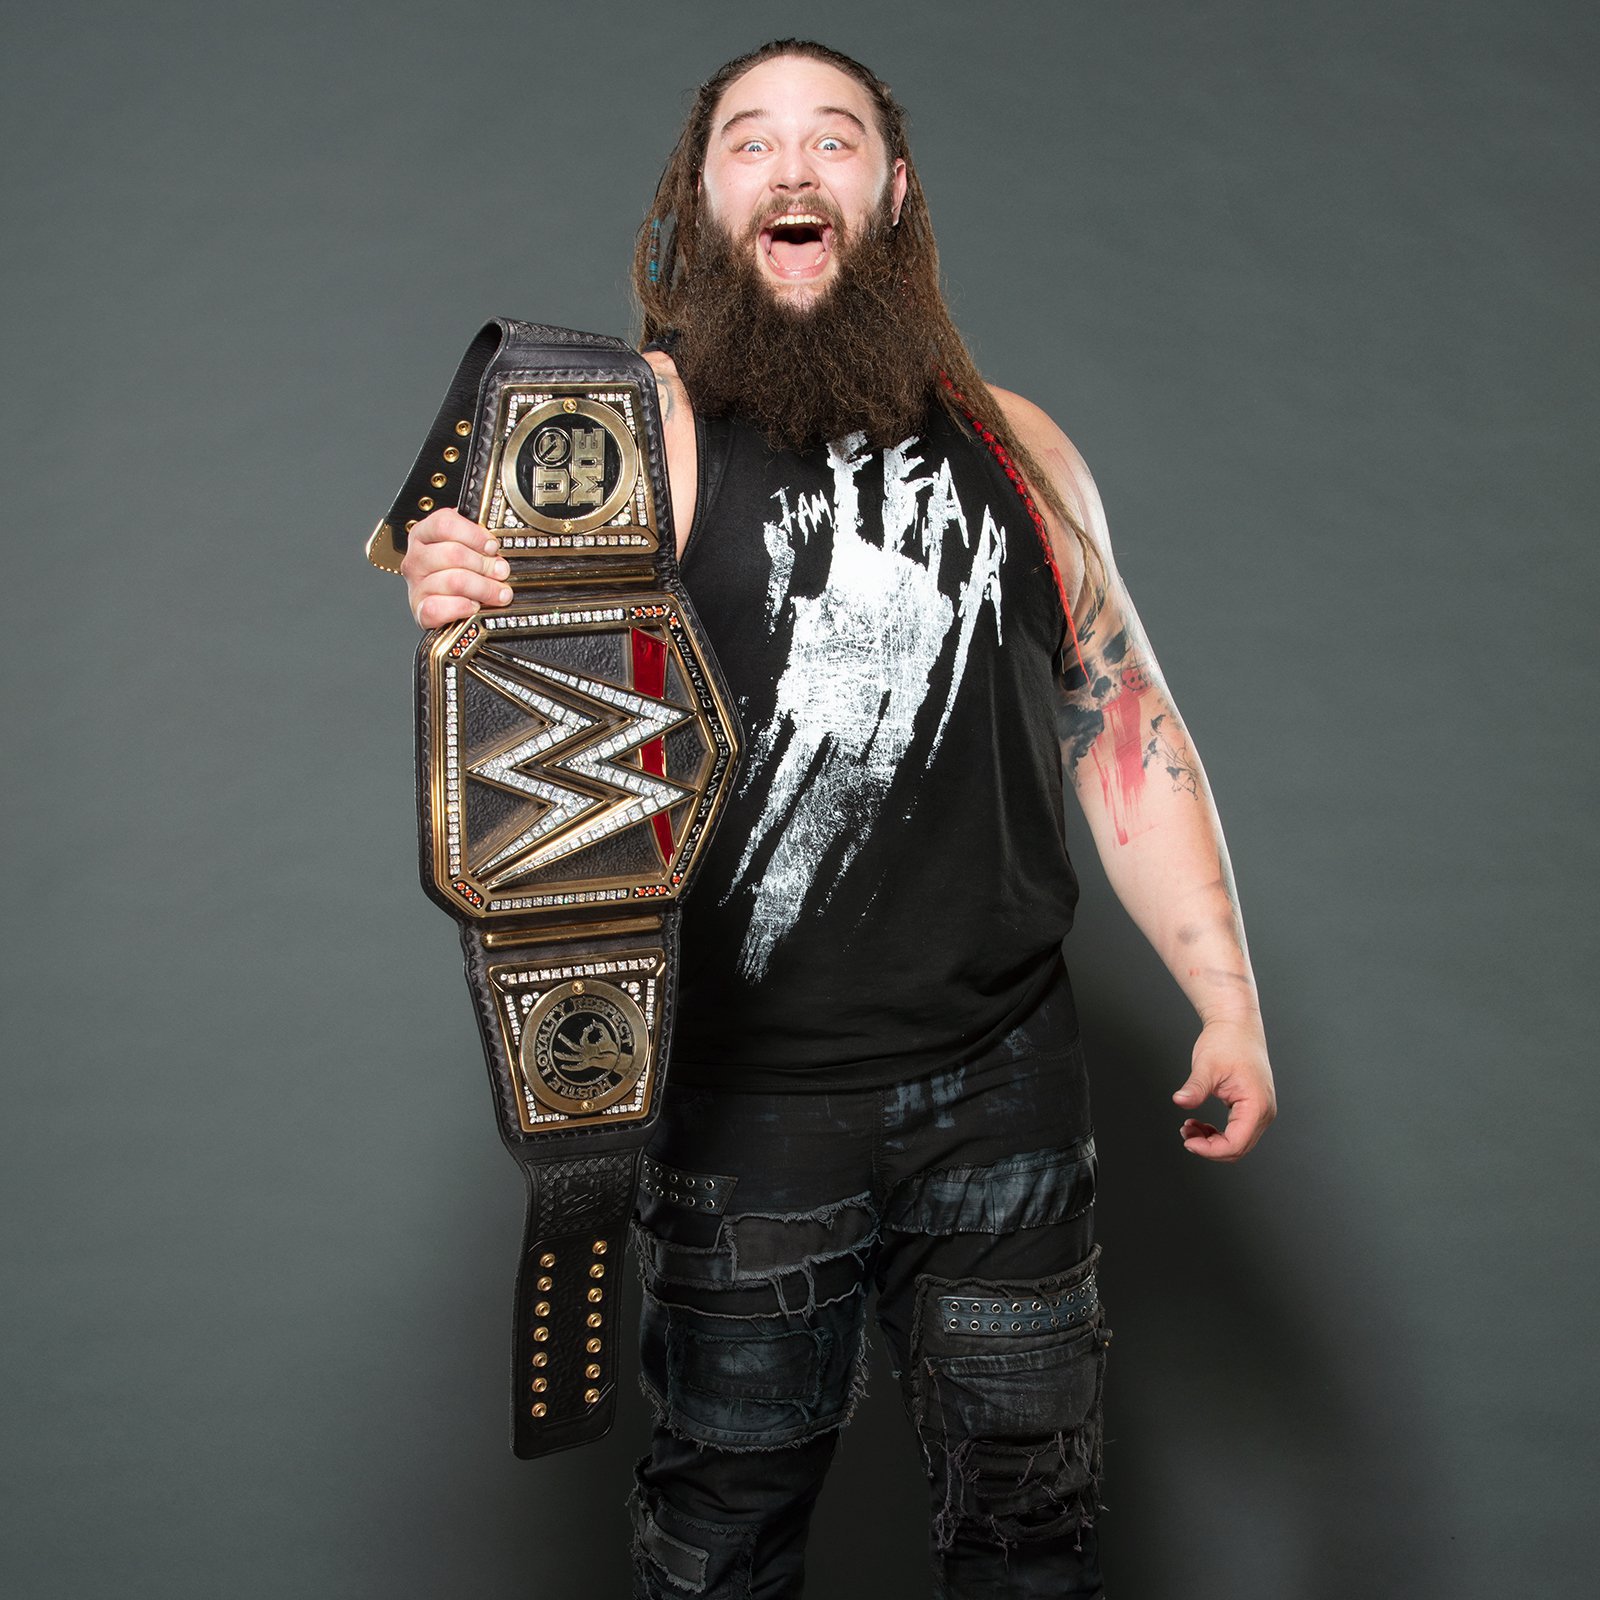 Look at how elated Bray Wyatt was after winning the WWE Championship